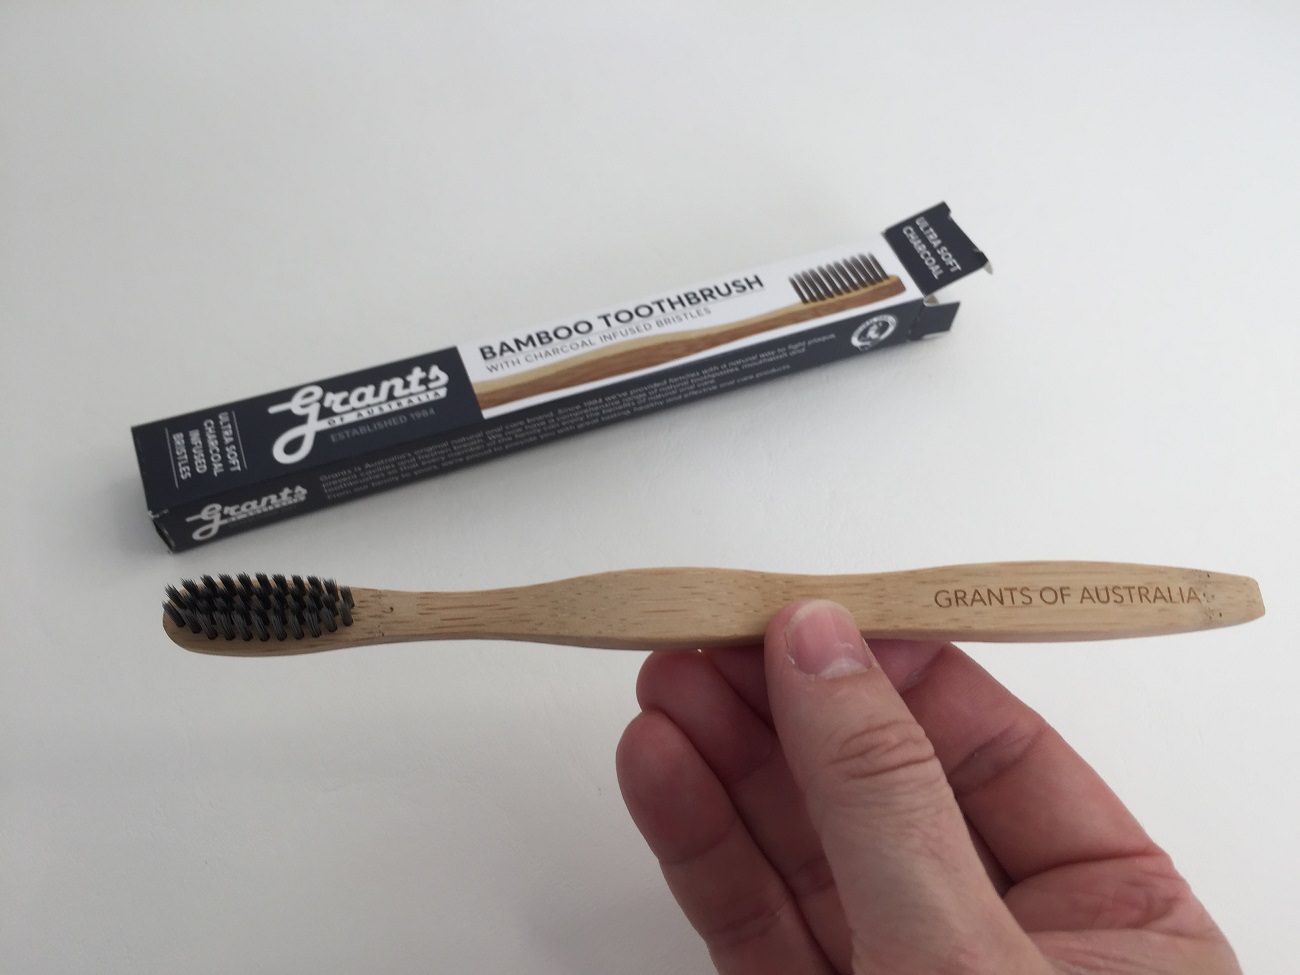 Holding the Grants bamboo charcoal toothbrush